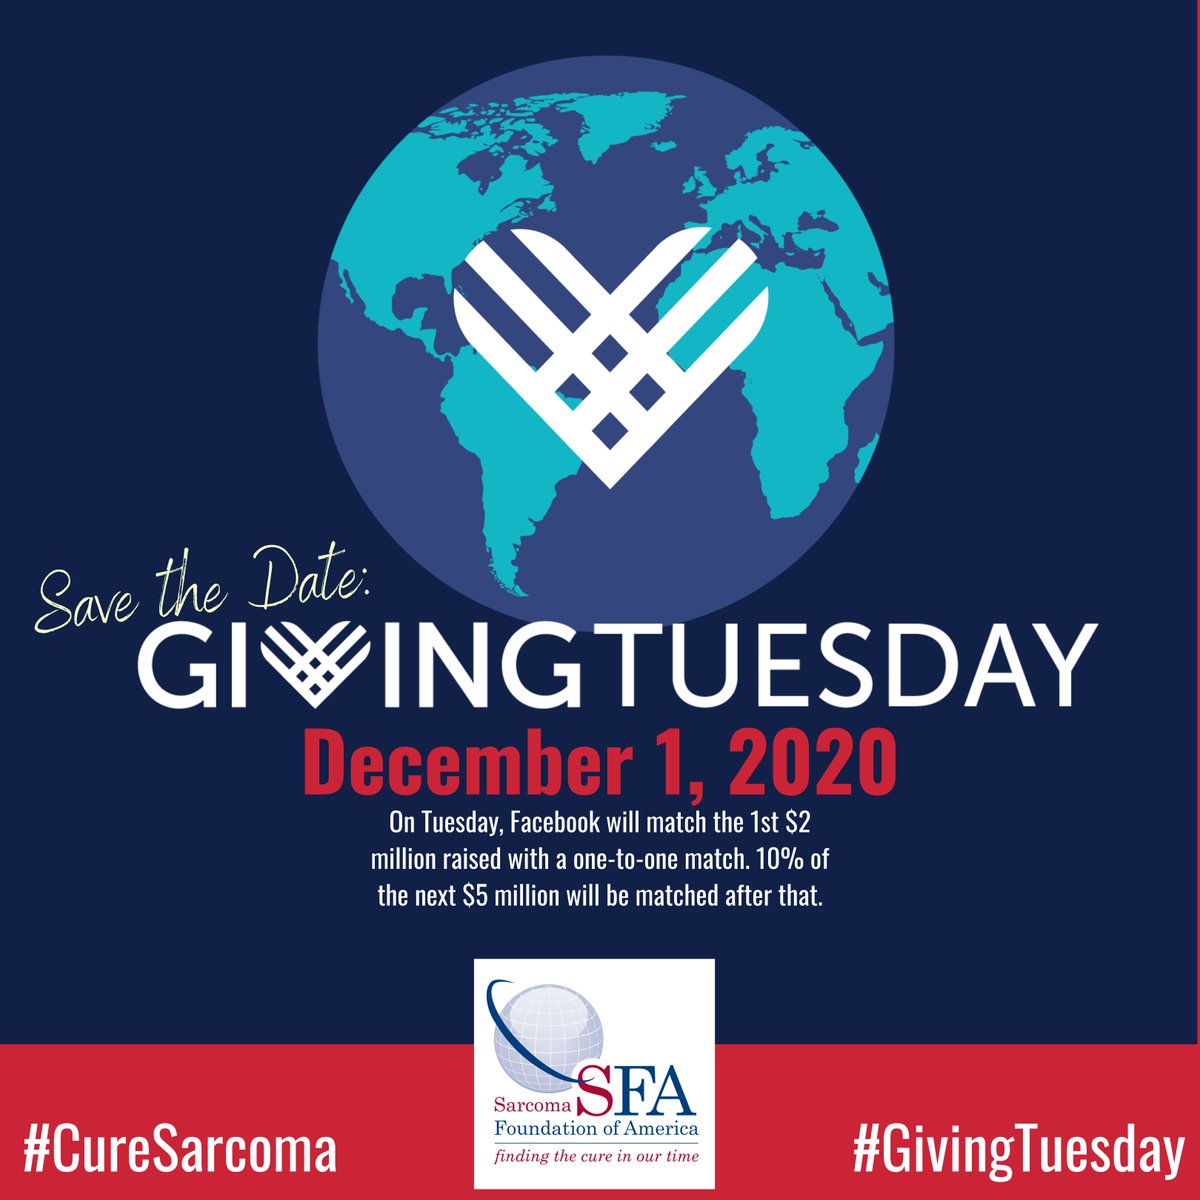 #GivingTuesday the global day of giving and the perfect time to show your support for SFA by making a donation. #GivingTuesday will take place on Dec. 1, 2020. Join the many SFA supporters across the country who are showing support for sarcoma research. p2p.onecause.com/sfagivingtuesd…